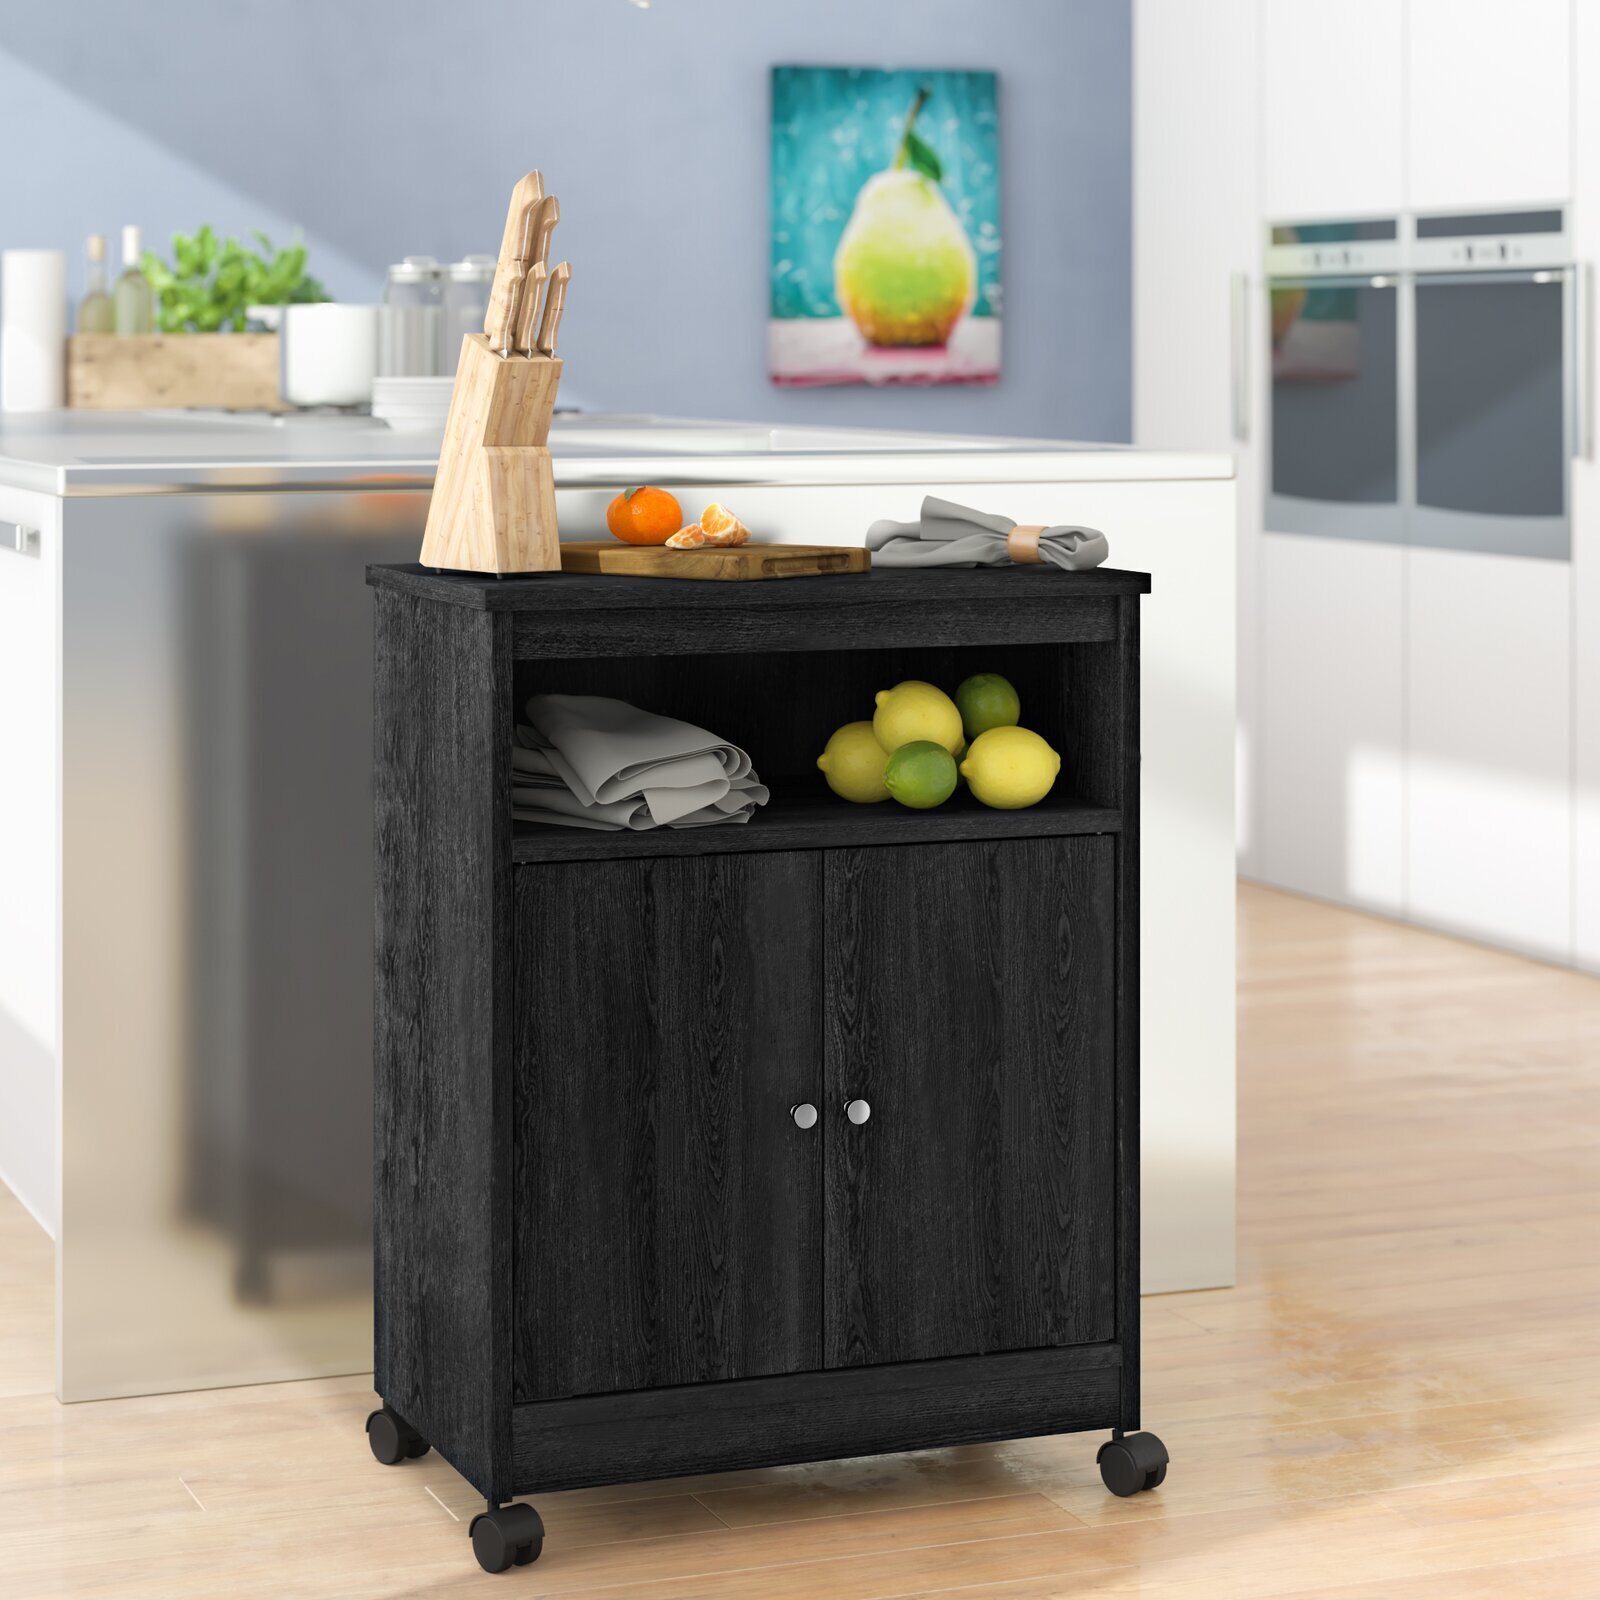 Cabinet on wheels with closed storage